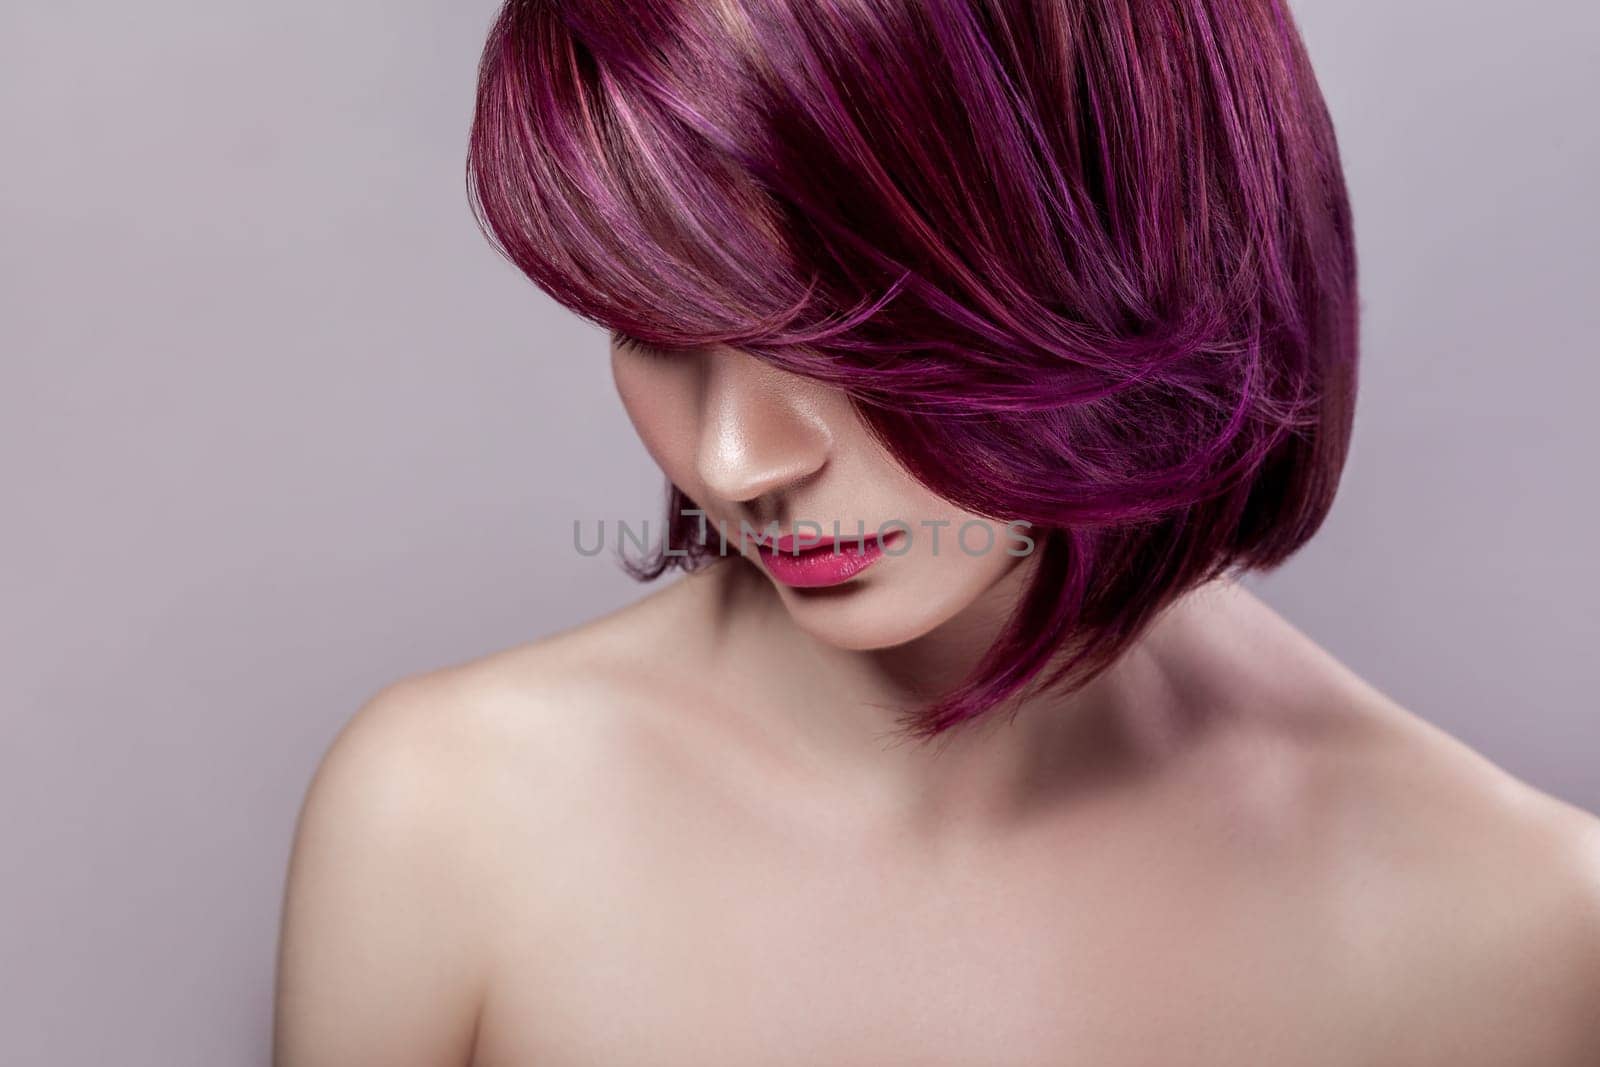 Calm beautiful woman with short purple colored hairstyle and pink lips, looking down. by Khosro1